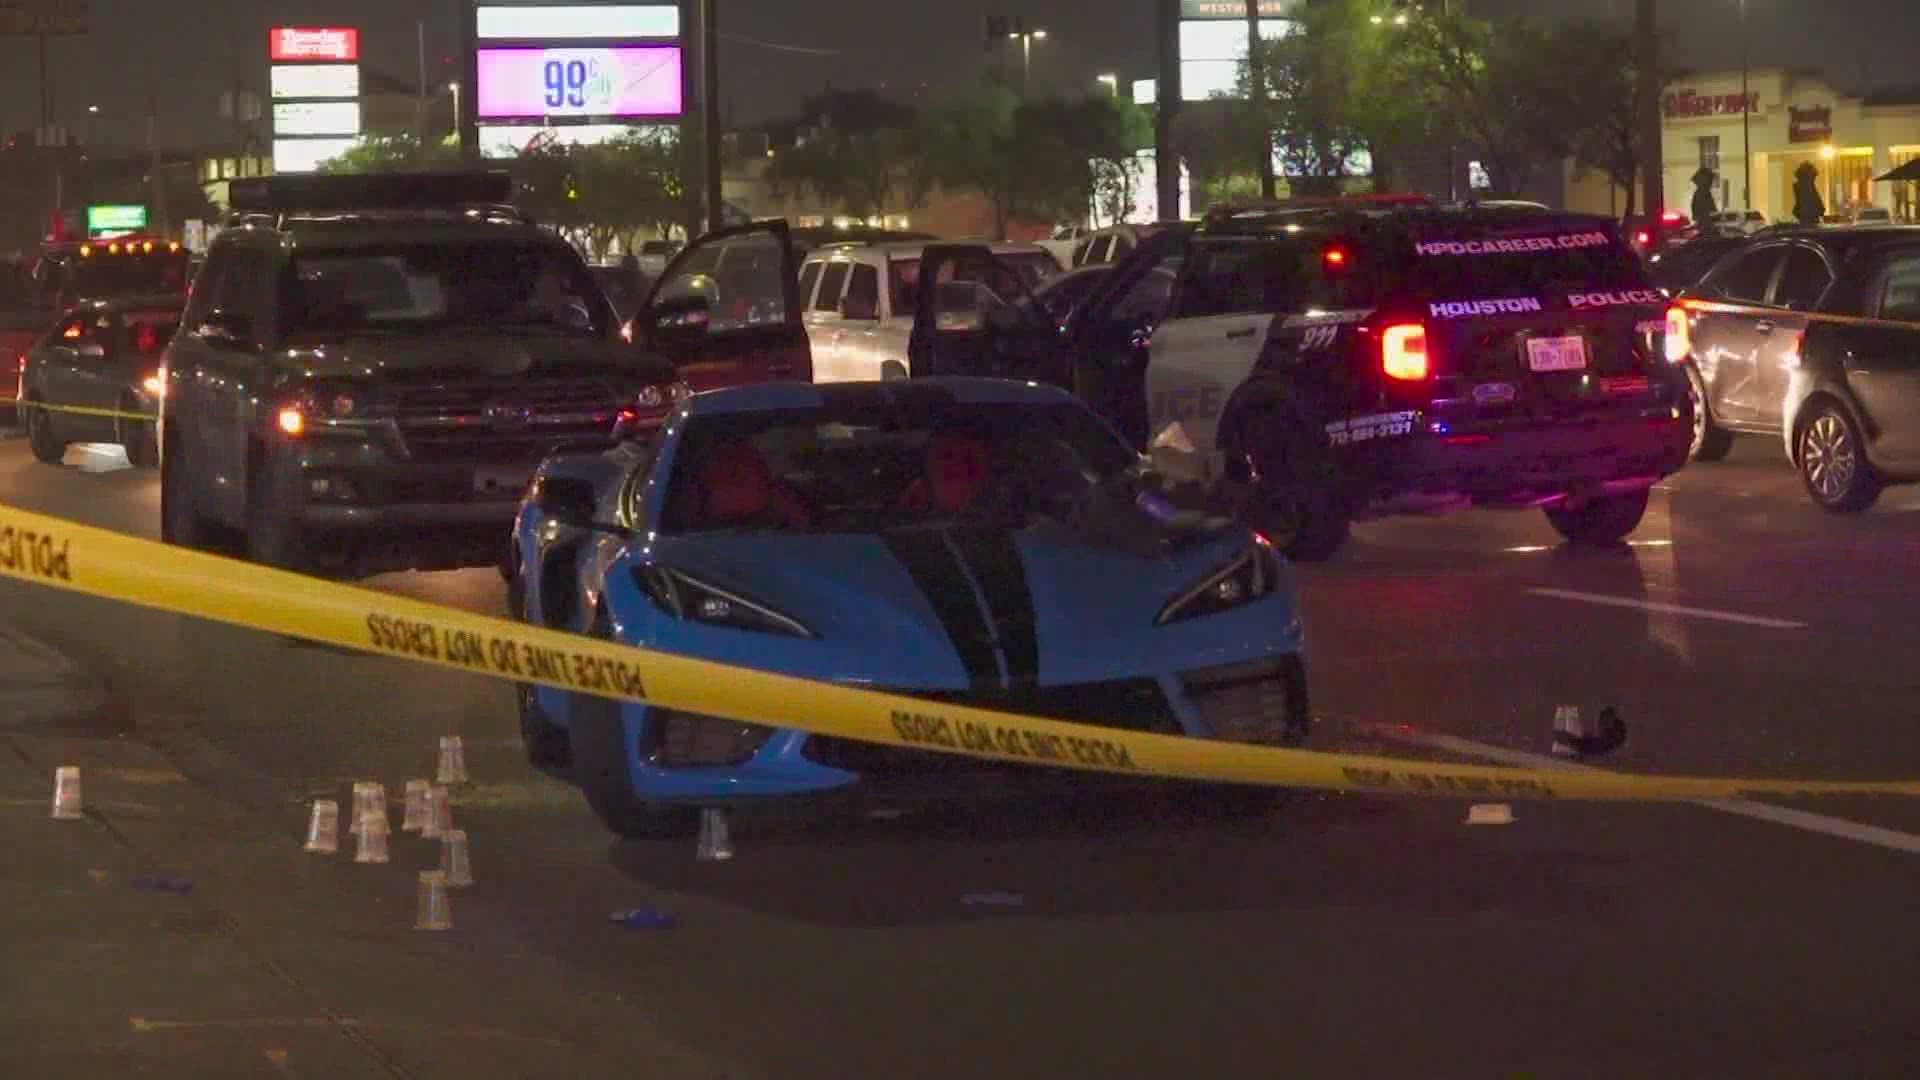 Houston police are hoping surveillance video will lead them to the gunman who shot two men sitting in a blue Corvette late Saturday night in west Houston.